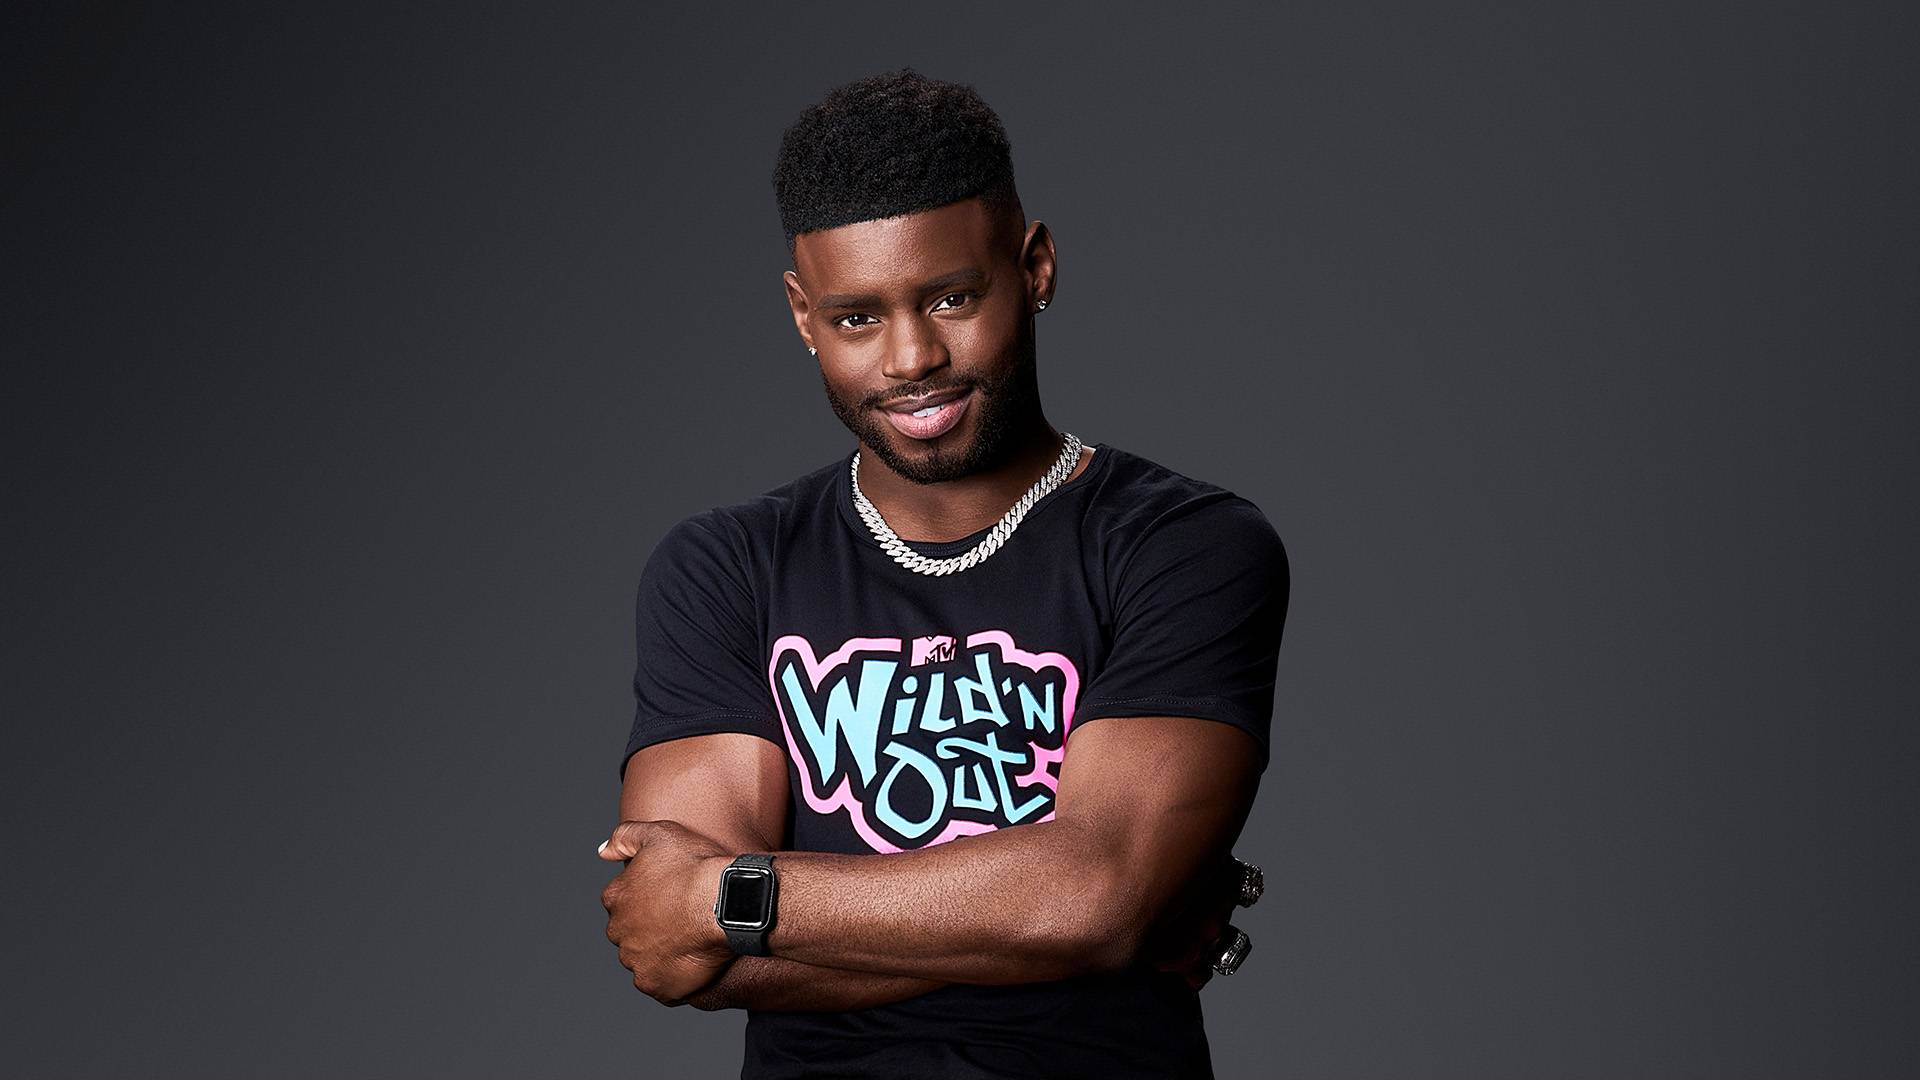 wild 'n out tour schedule